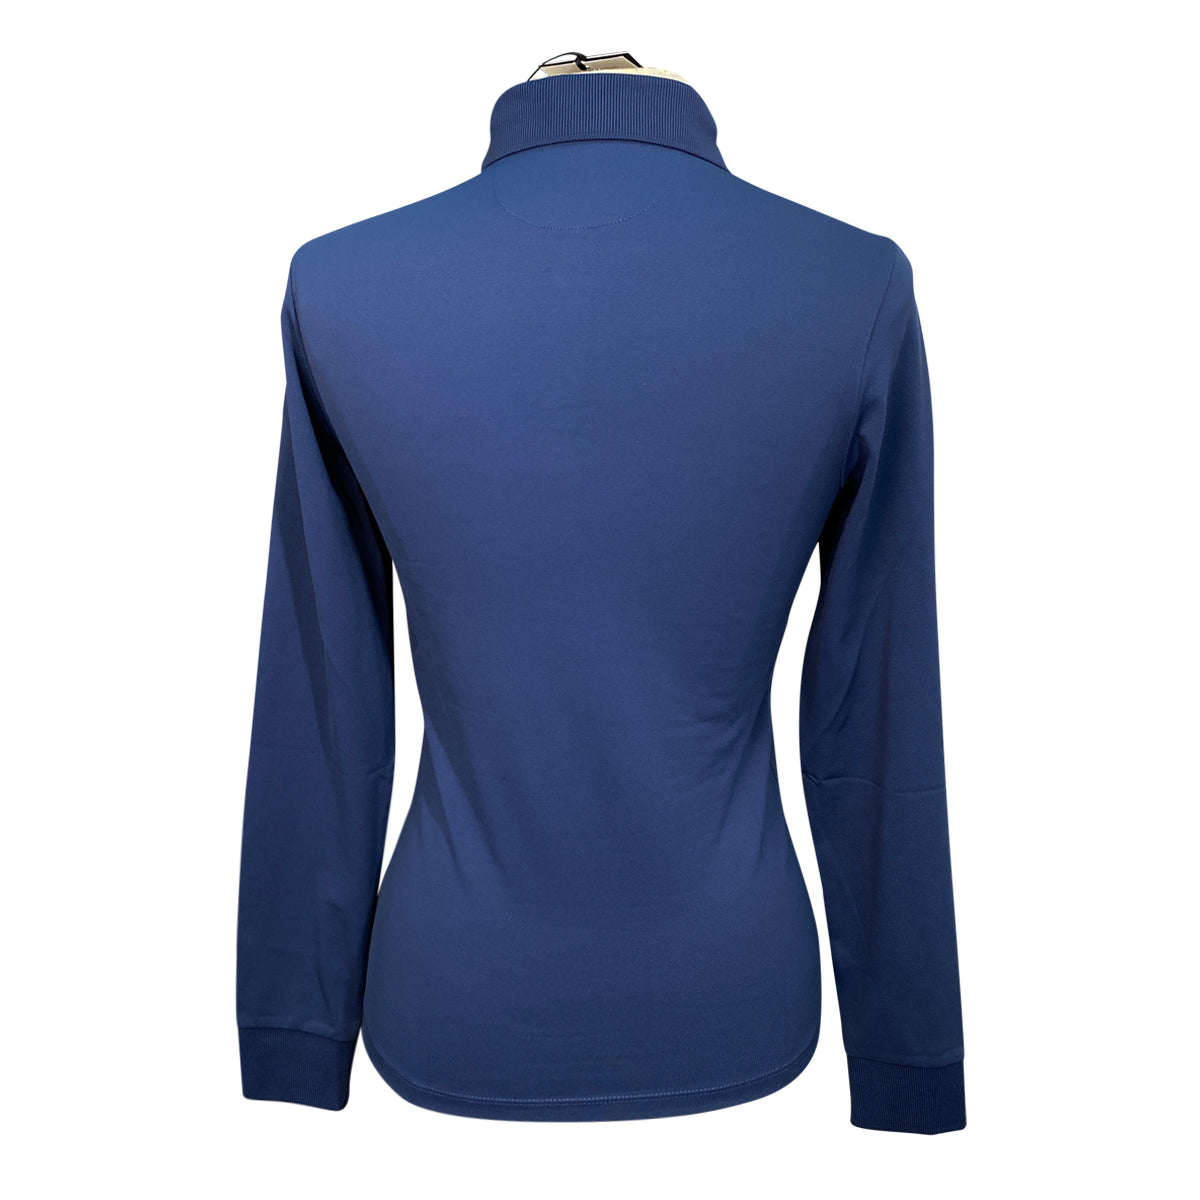 Equiline 'Evae' Long Sleeve Polo Shirt in Diplomatic Blue